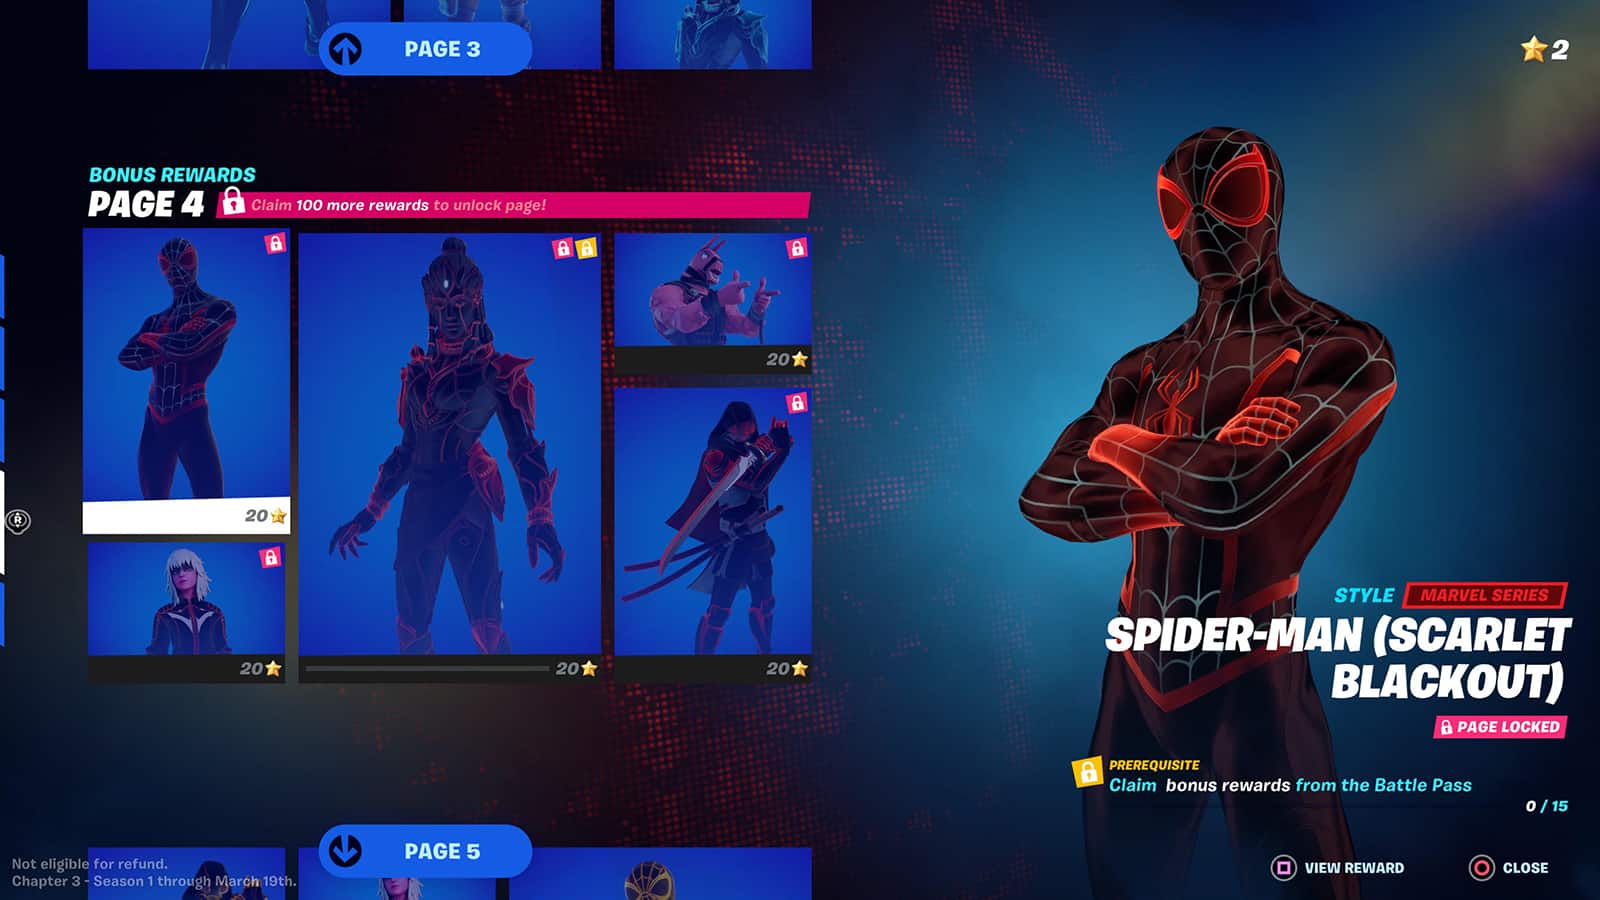 The Scarlet Blackout Super Styles menu in Fortnite Chapter 3